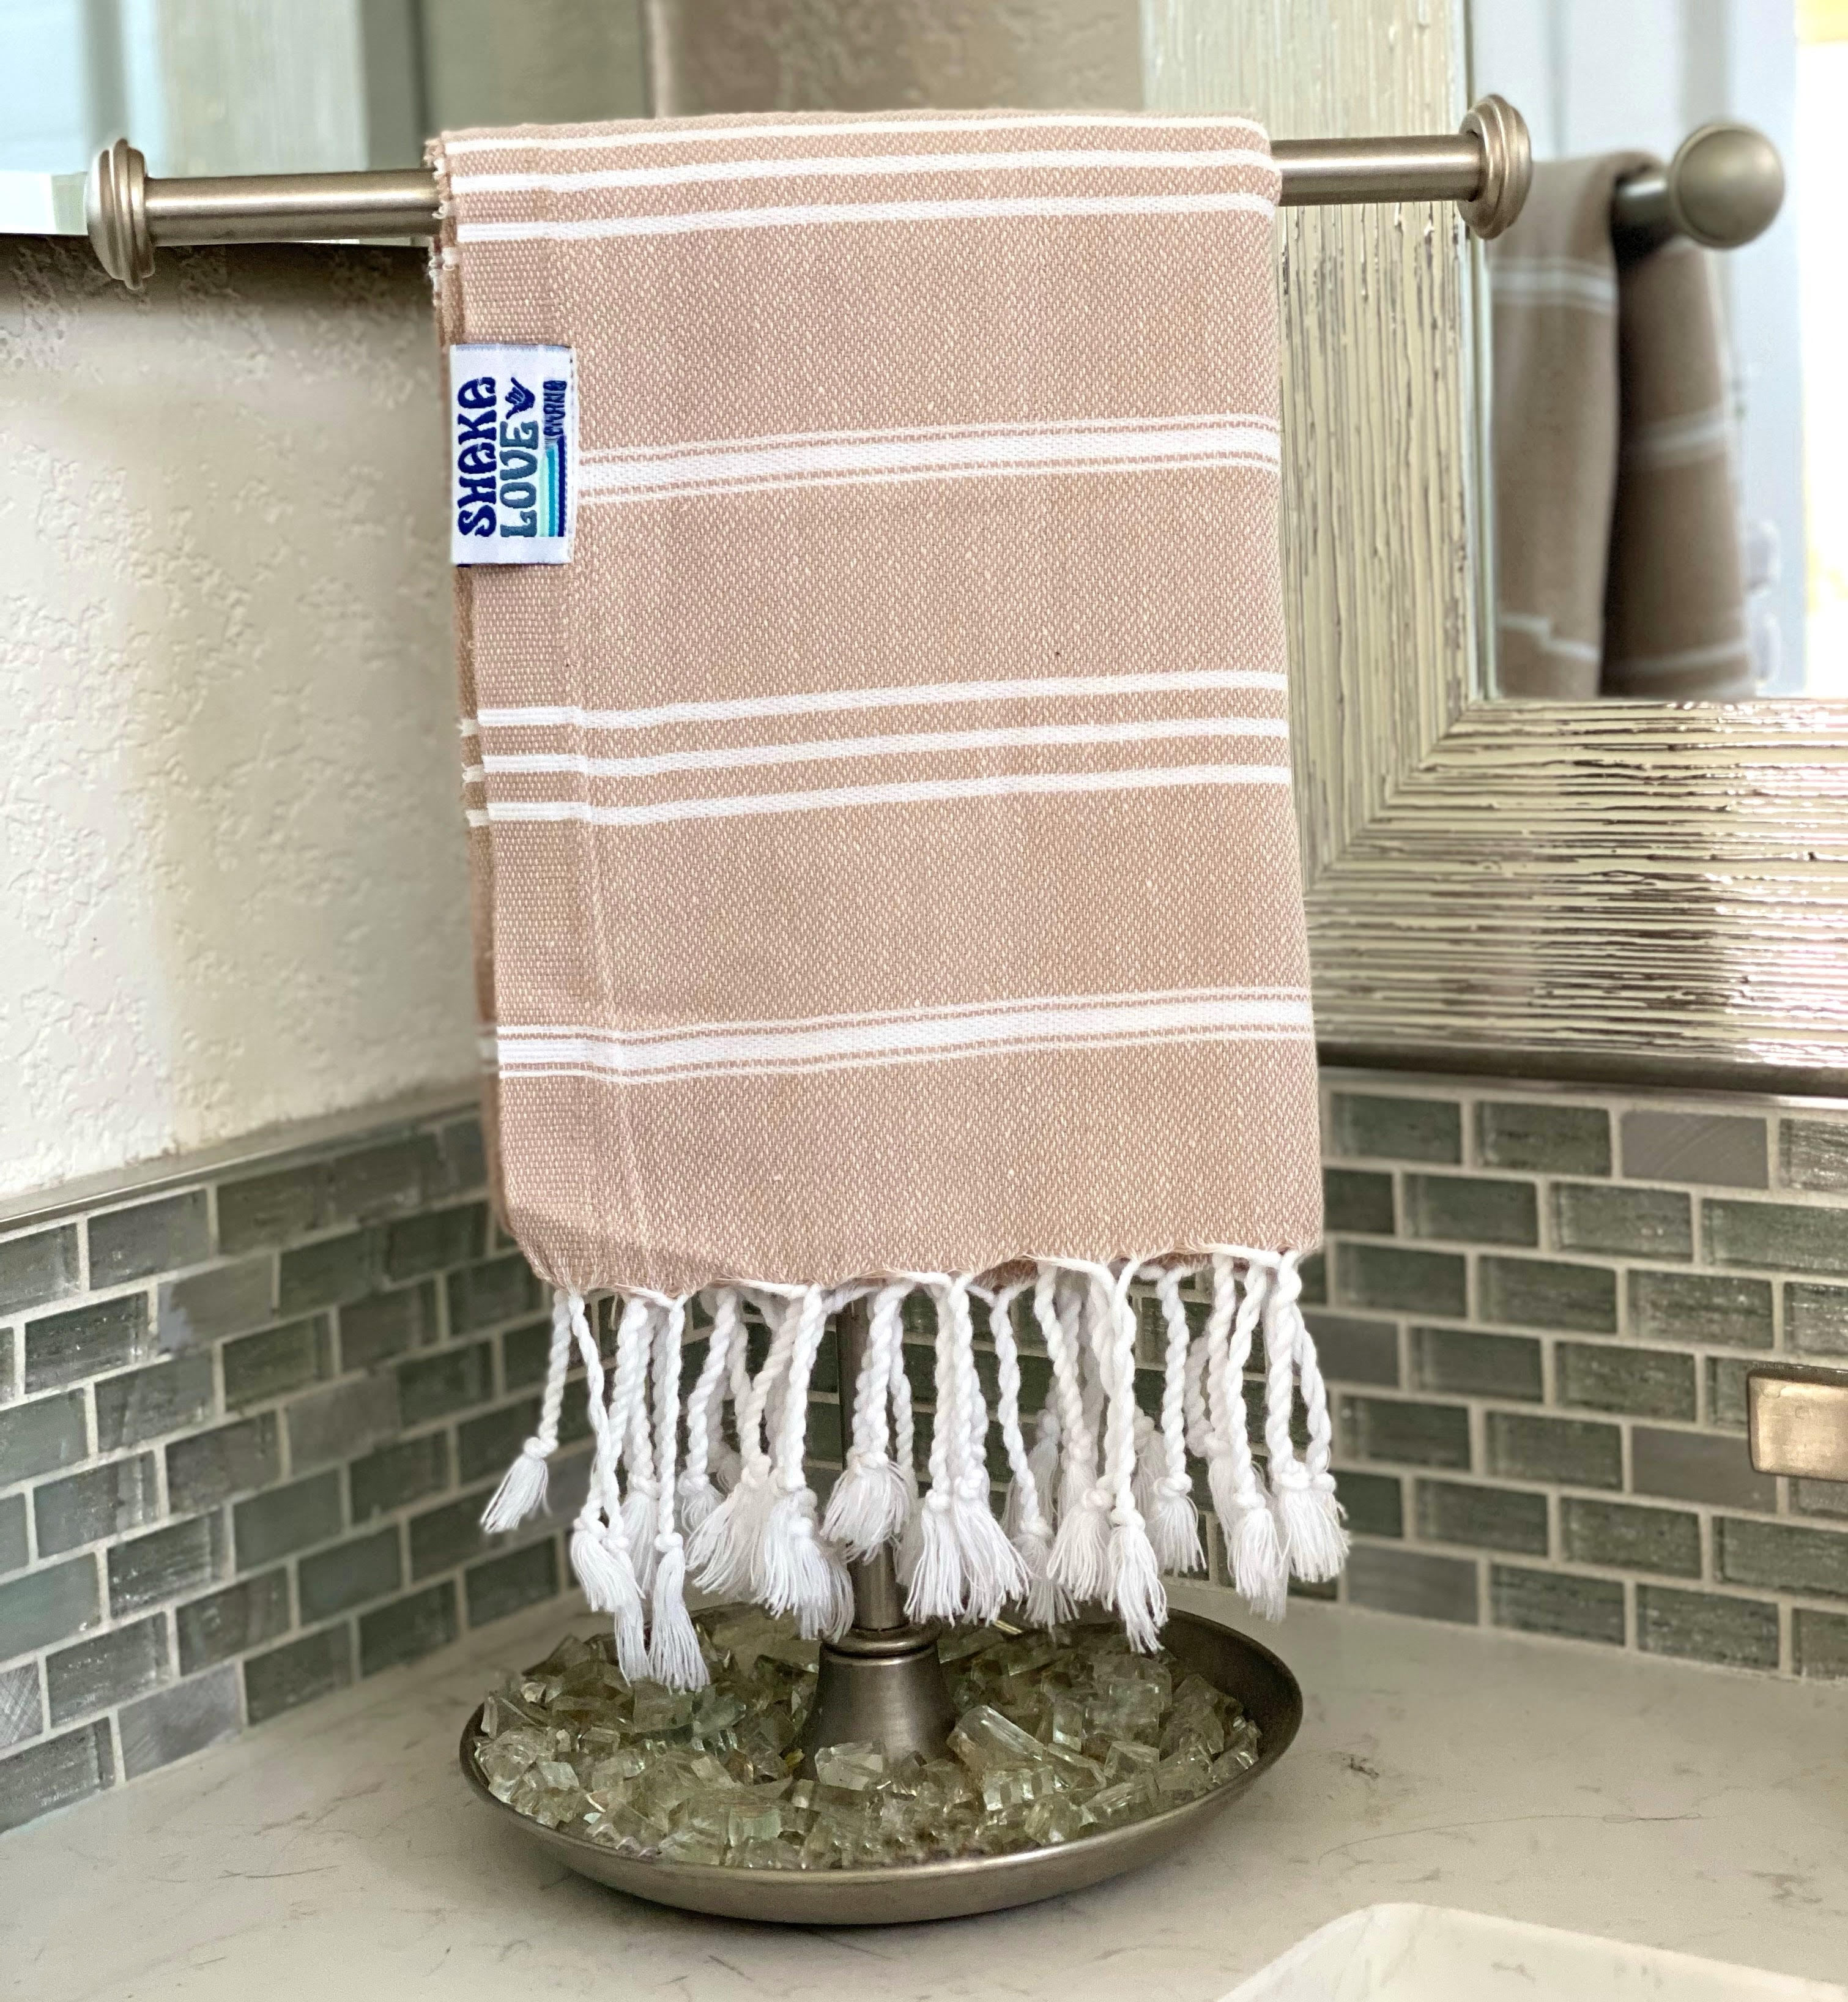 SHAKA Hand Towel Bundle - 6 Towels for only $45